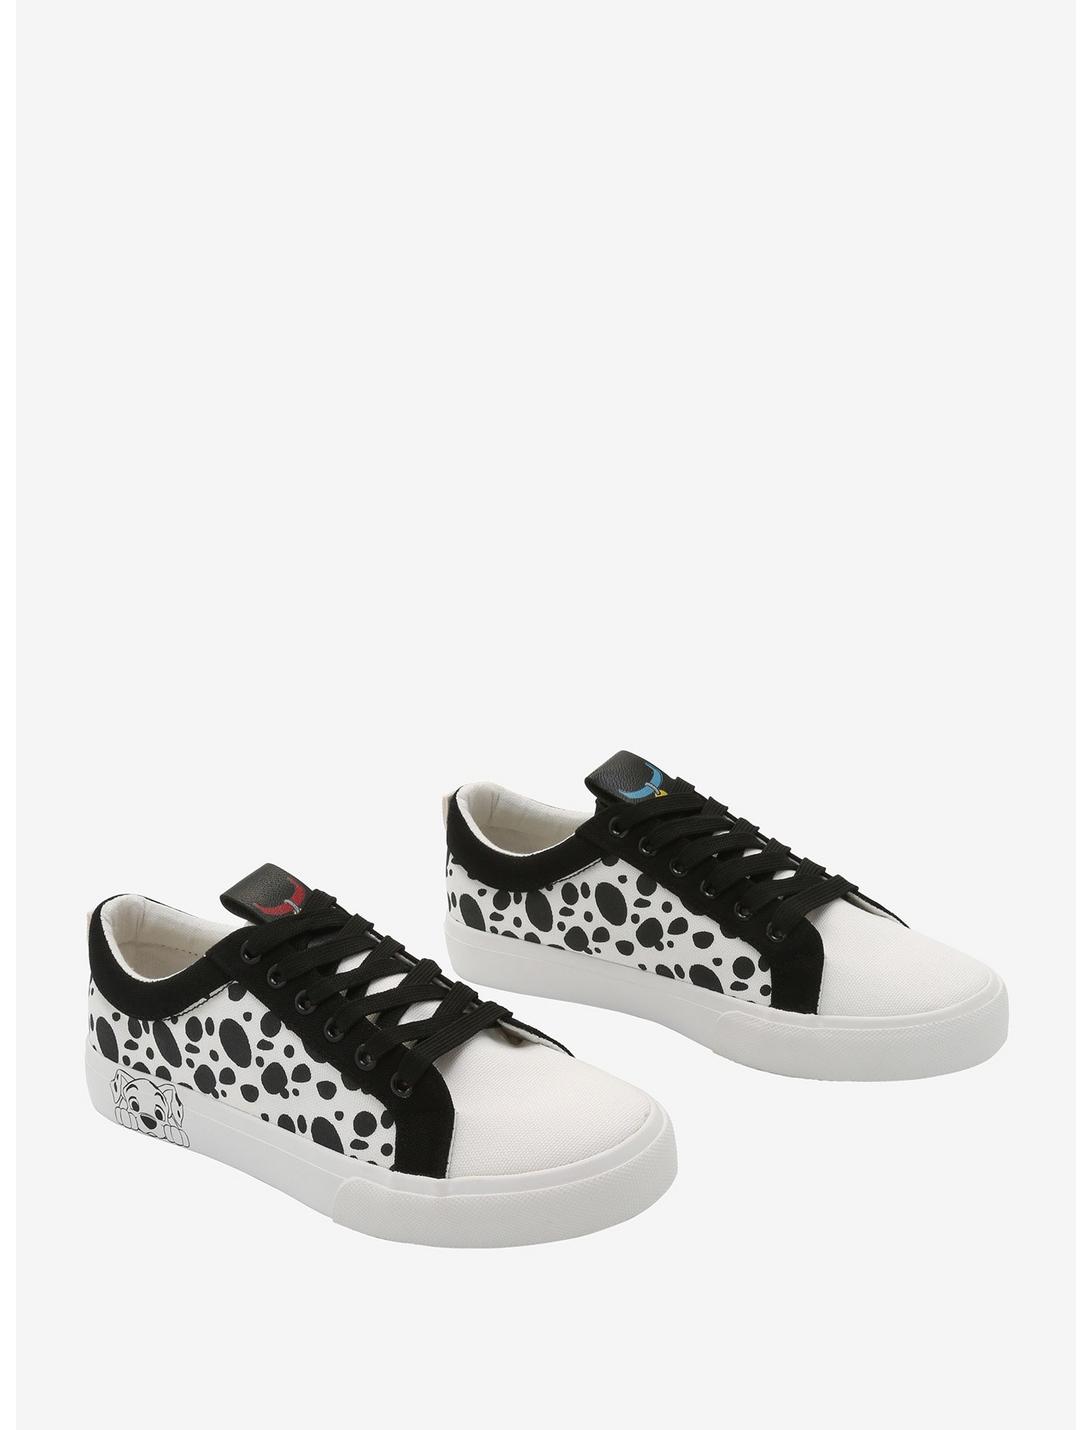 Disney 101 Dalmatians Spotted Lace-Up Sneakers, MULTI, hi-res